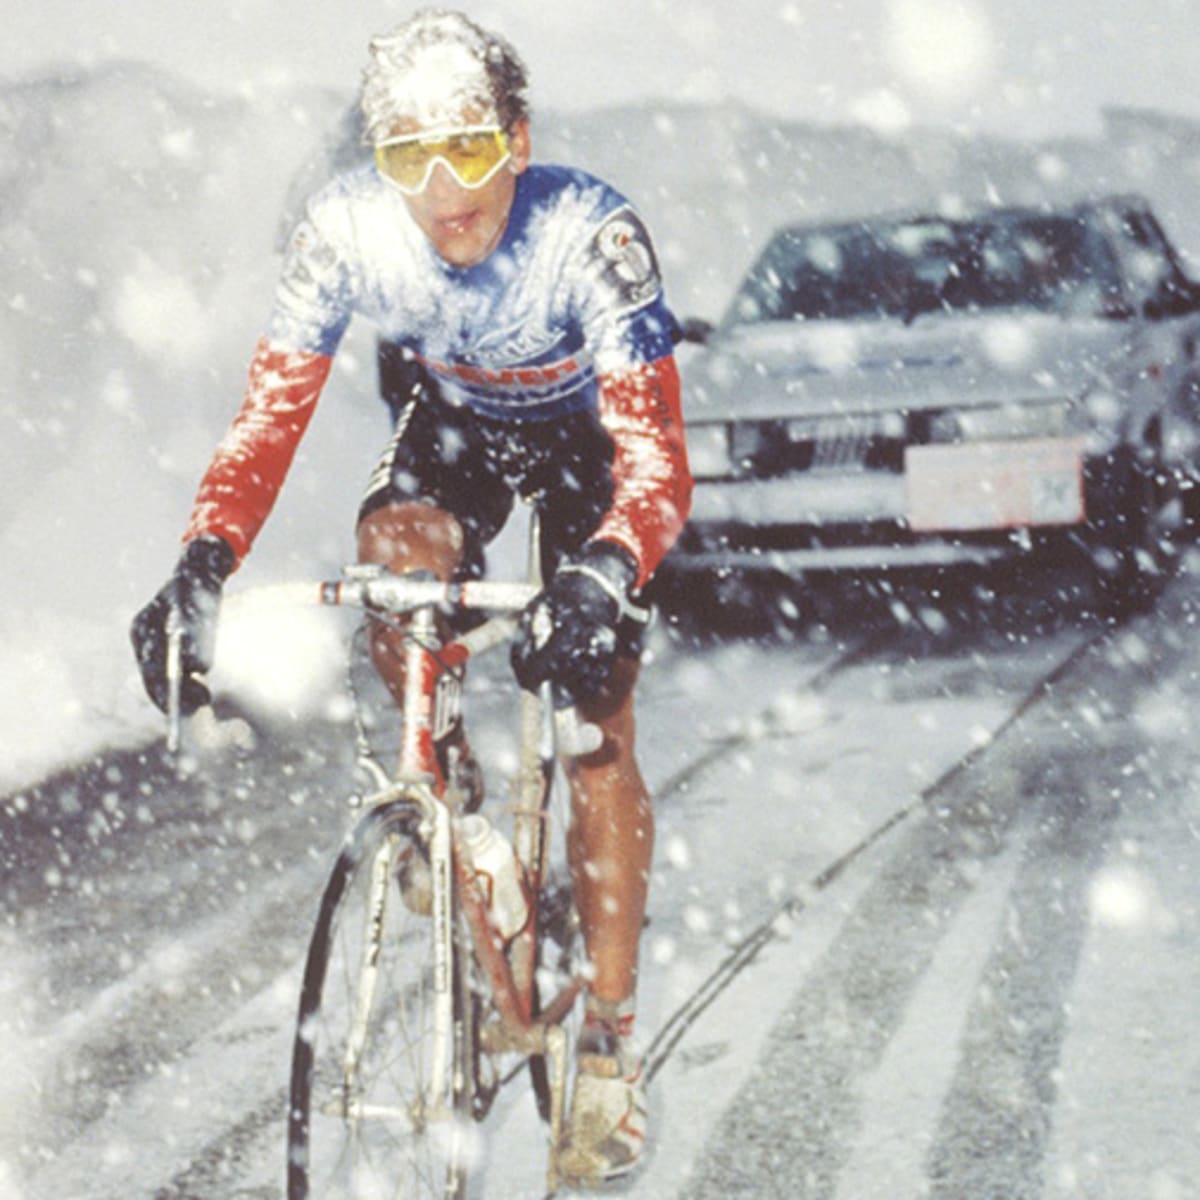 Austin Murphy: 25 years ago, Andy Hampsten made history during a snowy  stage of the Giro d'Italia - Sports Illustrated